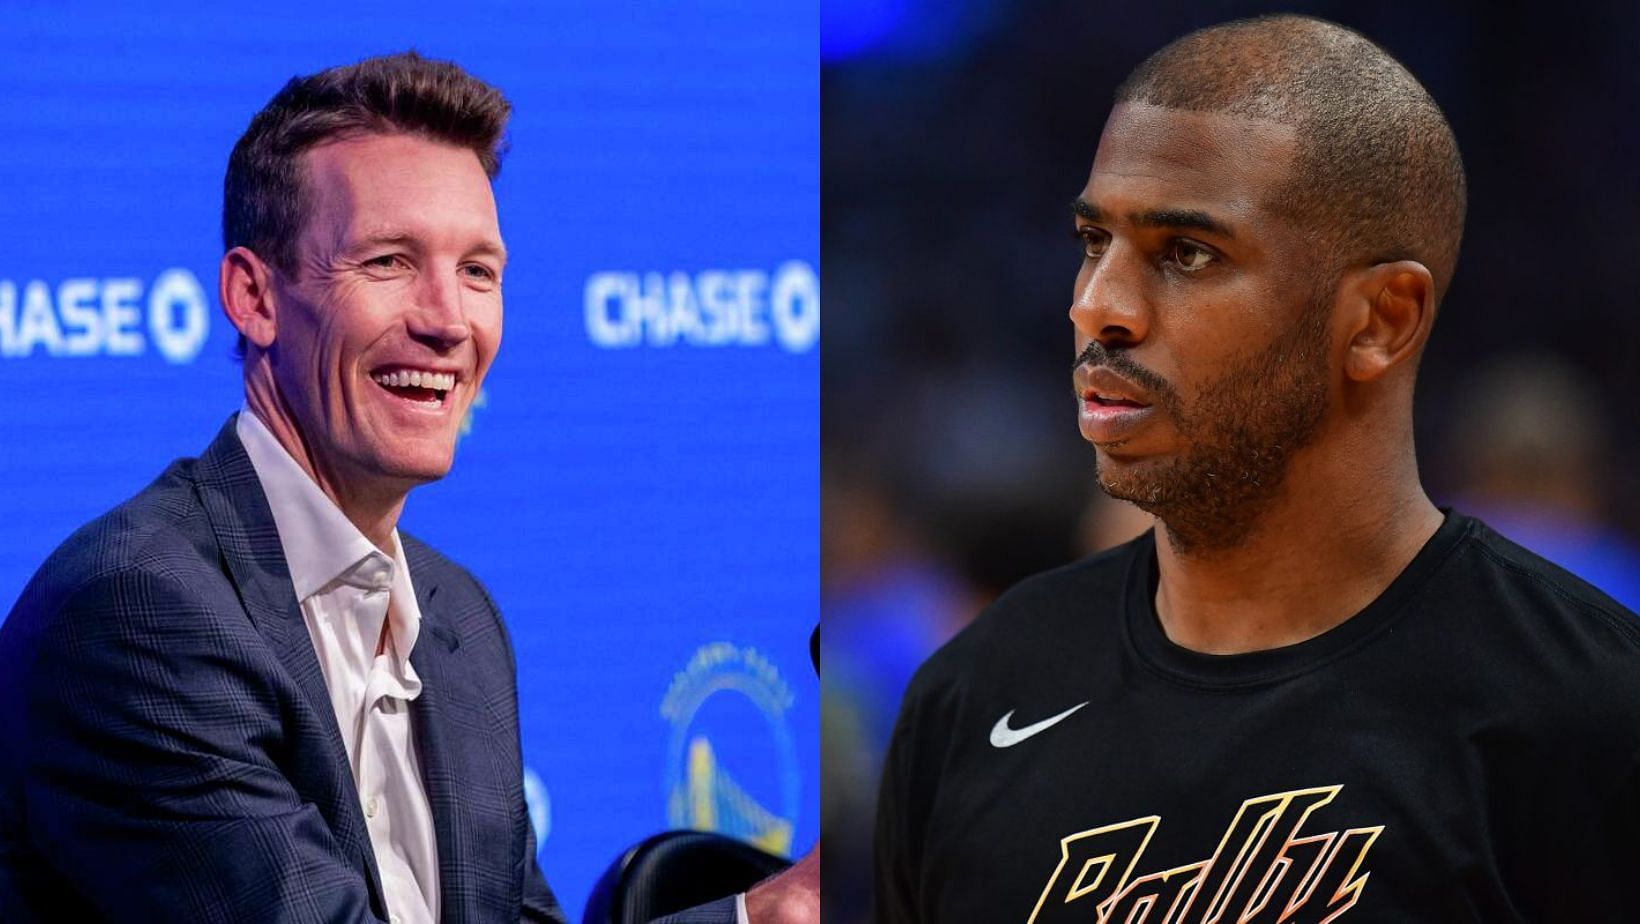 Golden State Warriors GM Mike Dunleavy Jr. is excited with the Chris Paul acquisition.